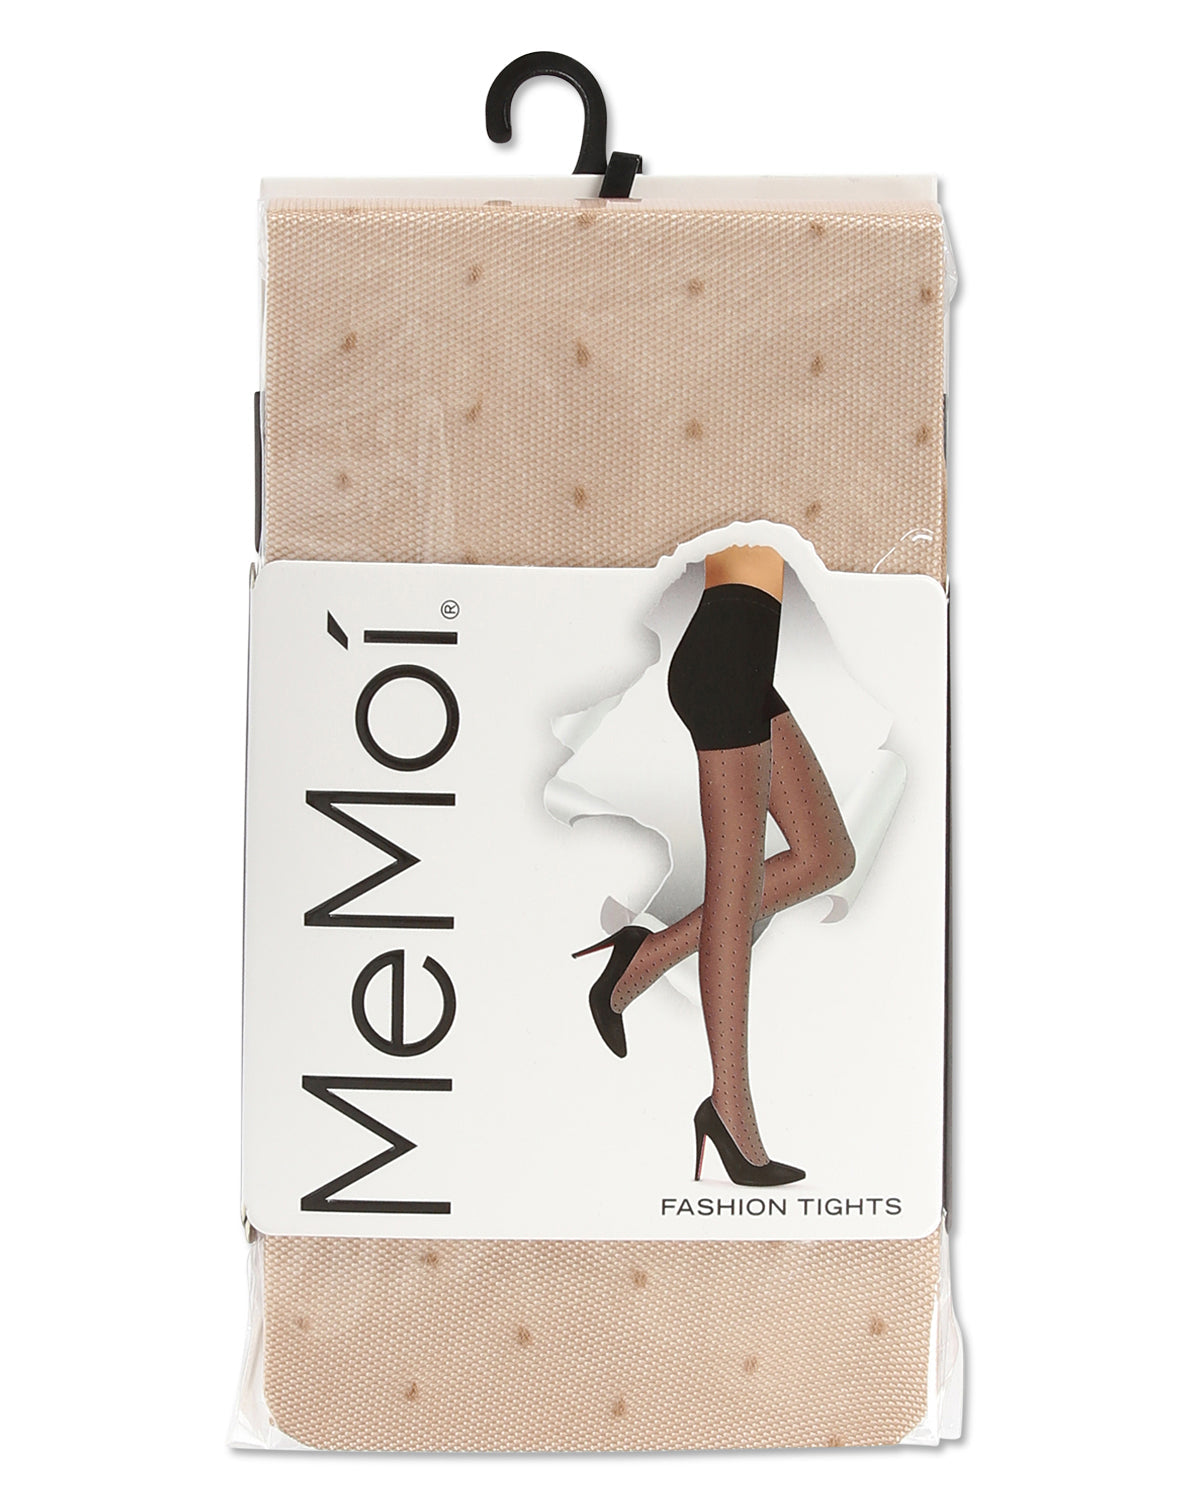 Glam Dotted Inlay Soft Sheer Tights